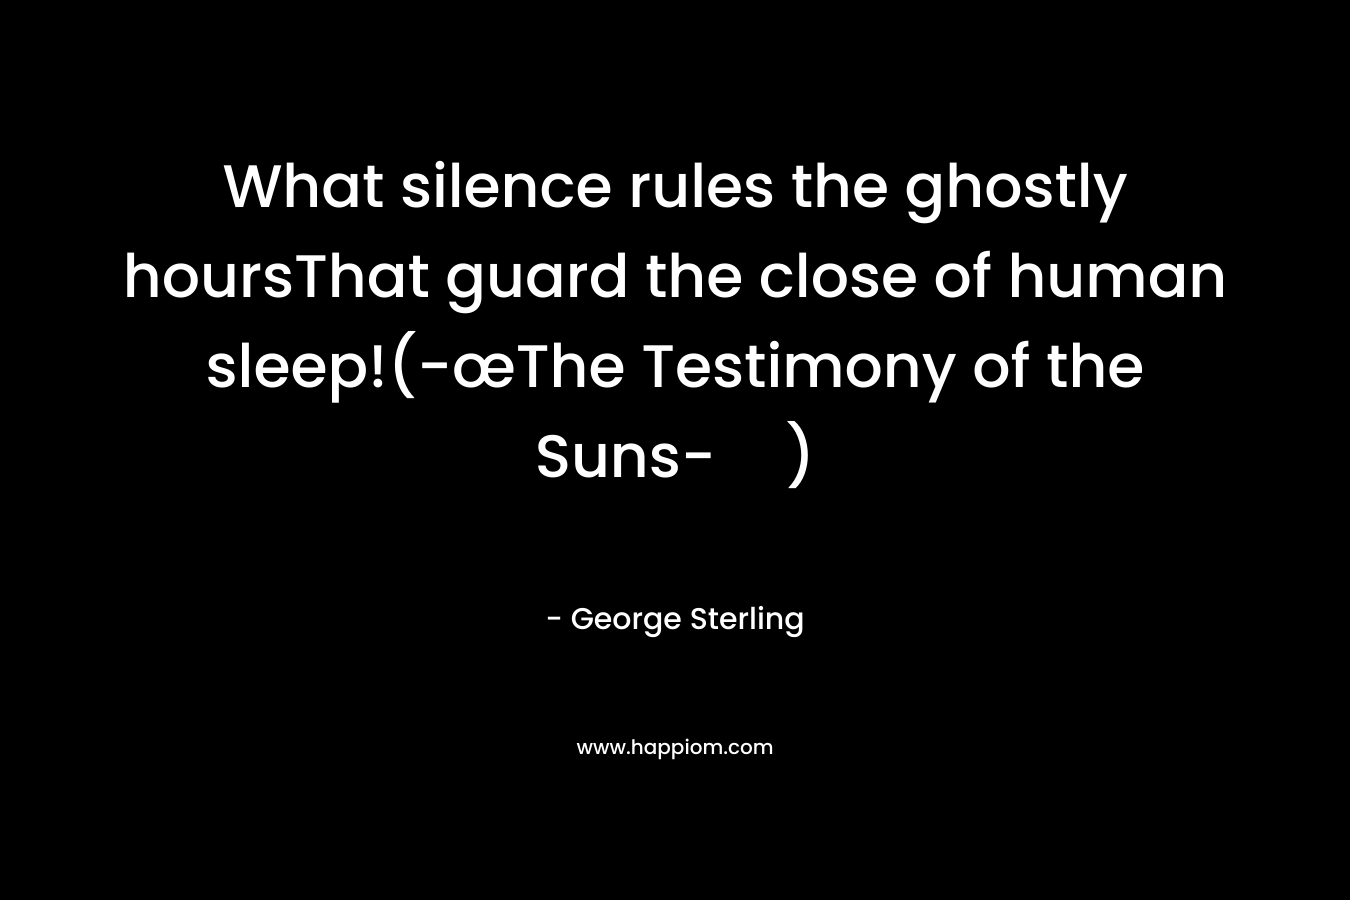 What silence rules the ghostly hoursThat guard the close of human sleep!(-œThe Testimony of the Suns-)